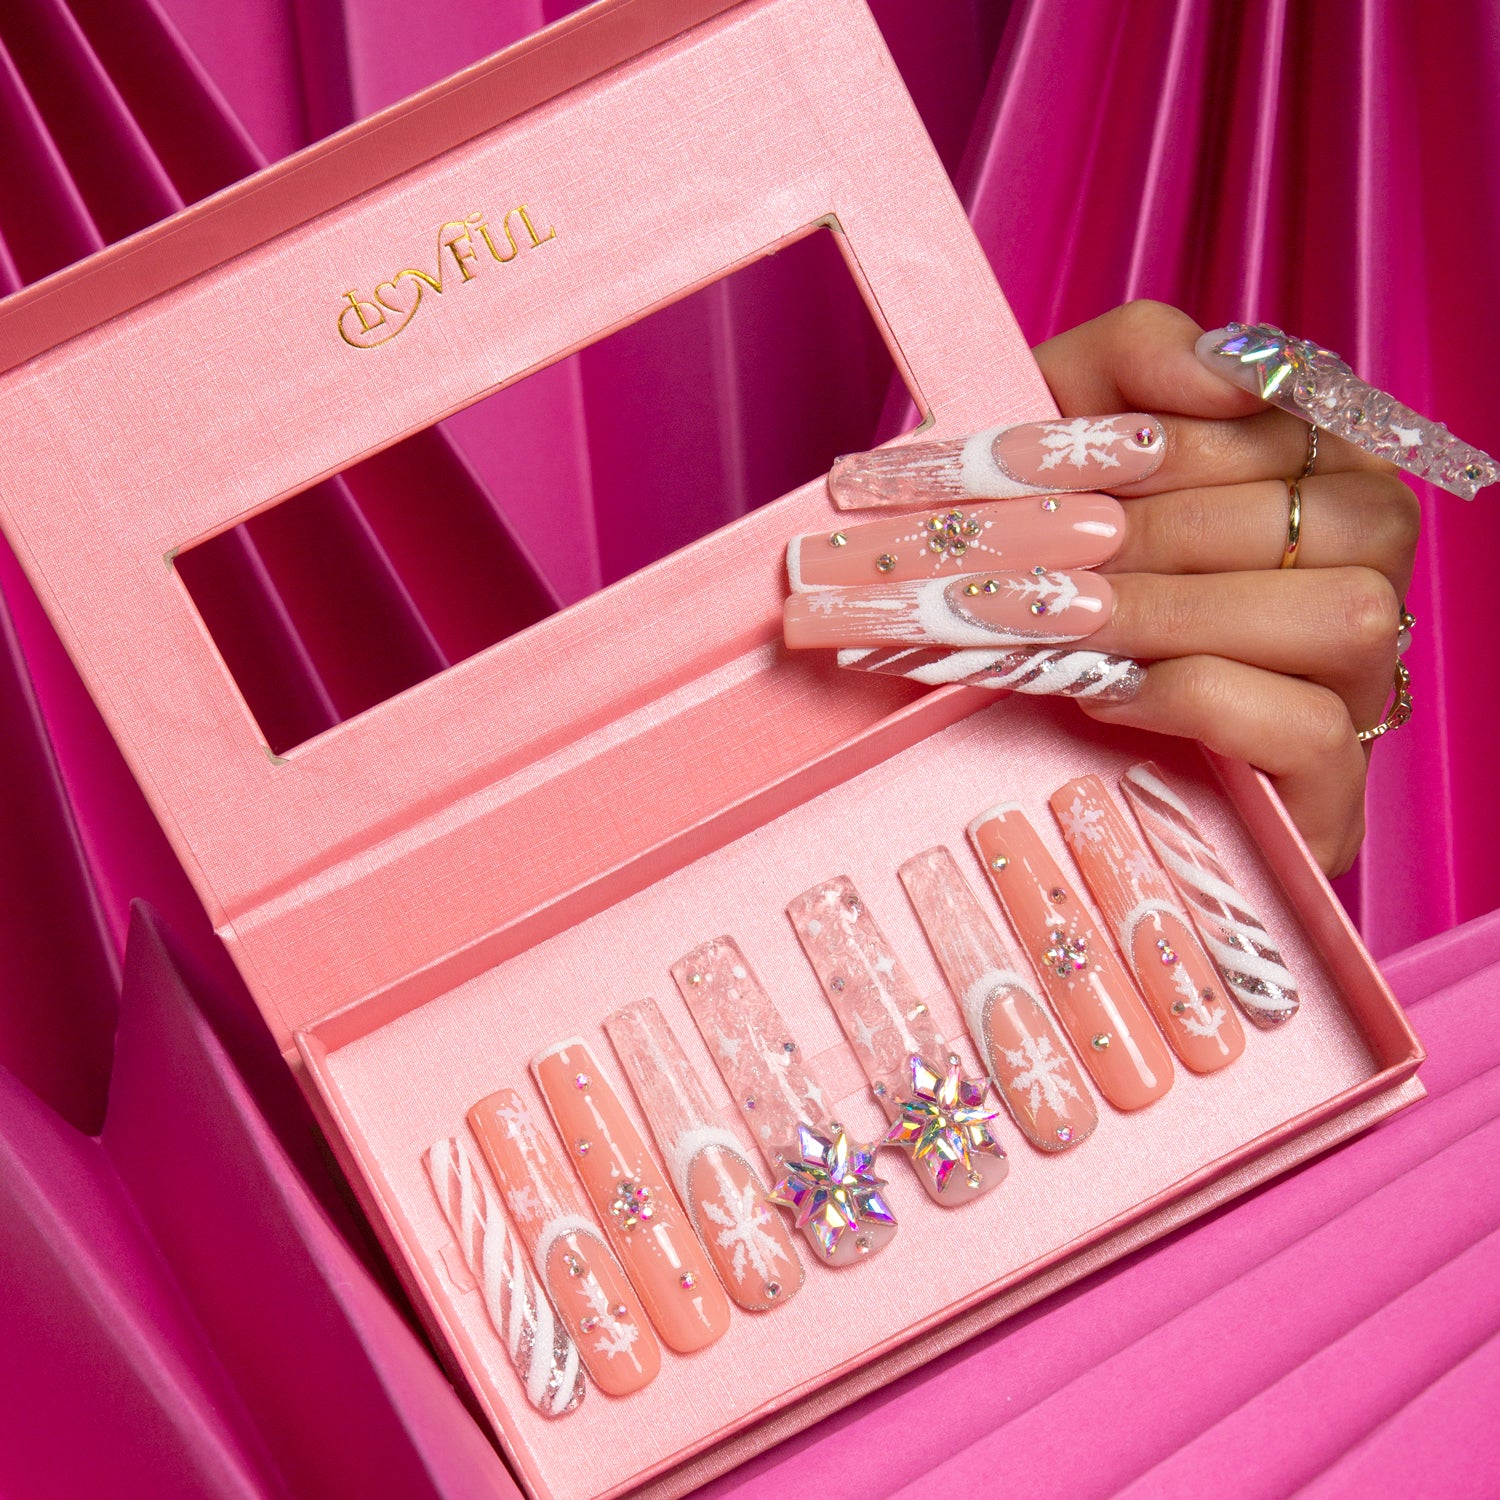 Hand displaying Lovful's Snowy Moonlight press-on nails with winter-themed designs including snowflakes and sparkles, neatly arranged in a pink box against a pink fabric background.